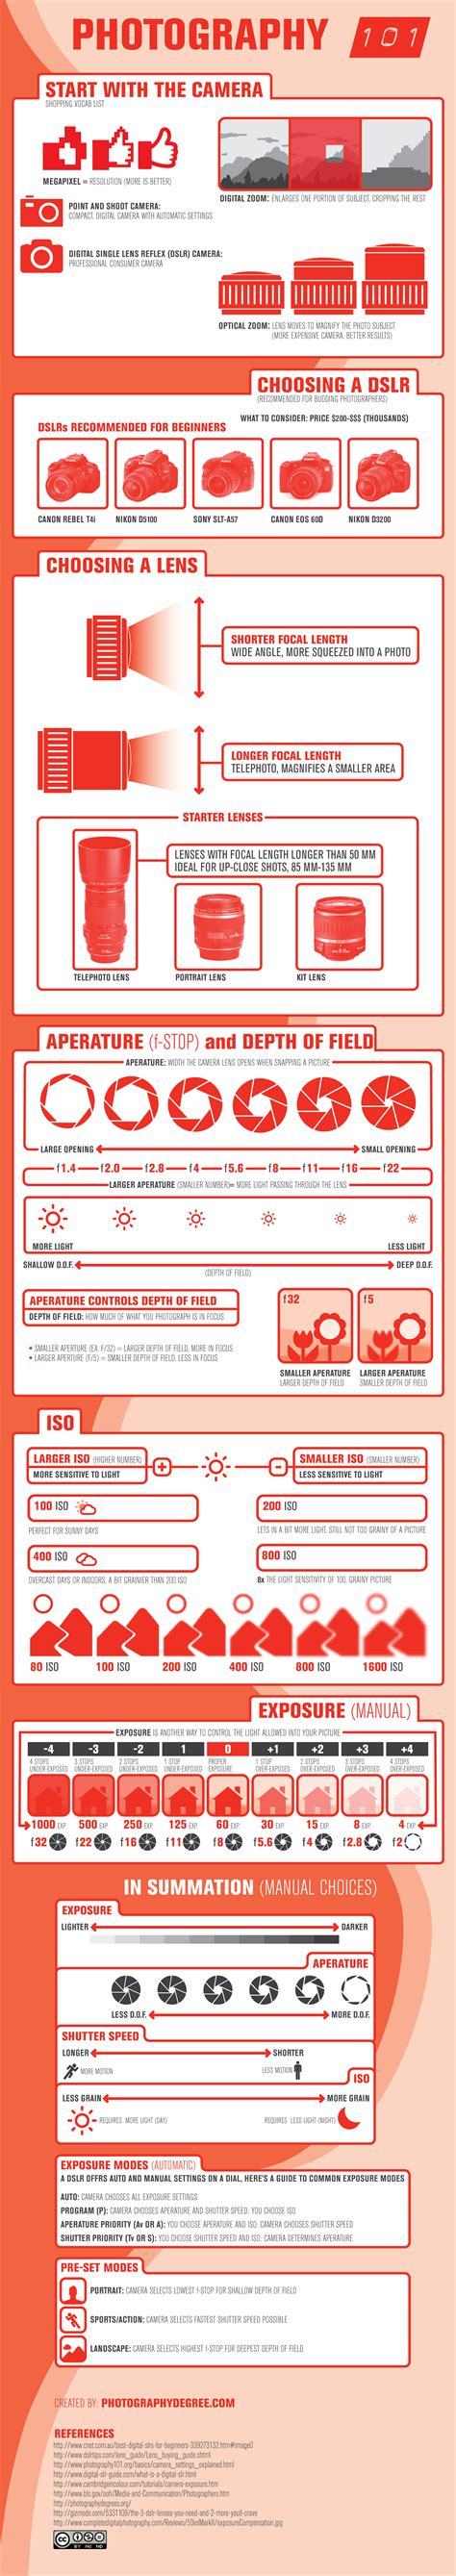 A Beginners Guide To Photography Infographic